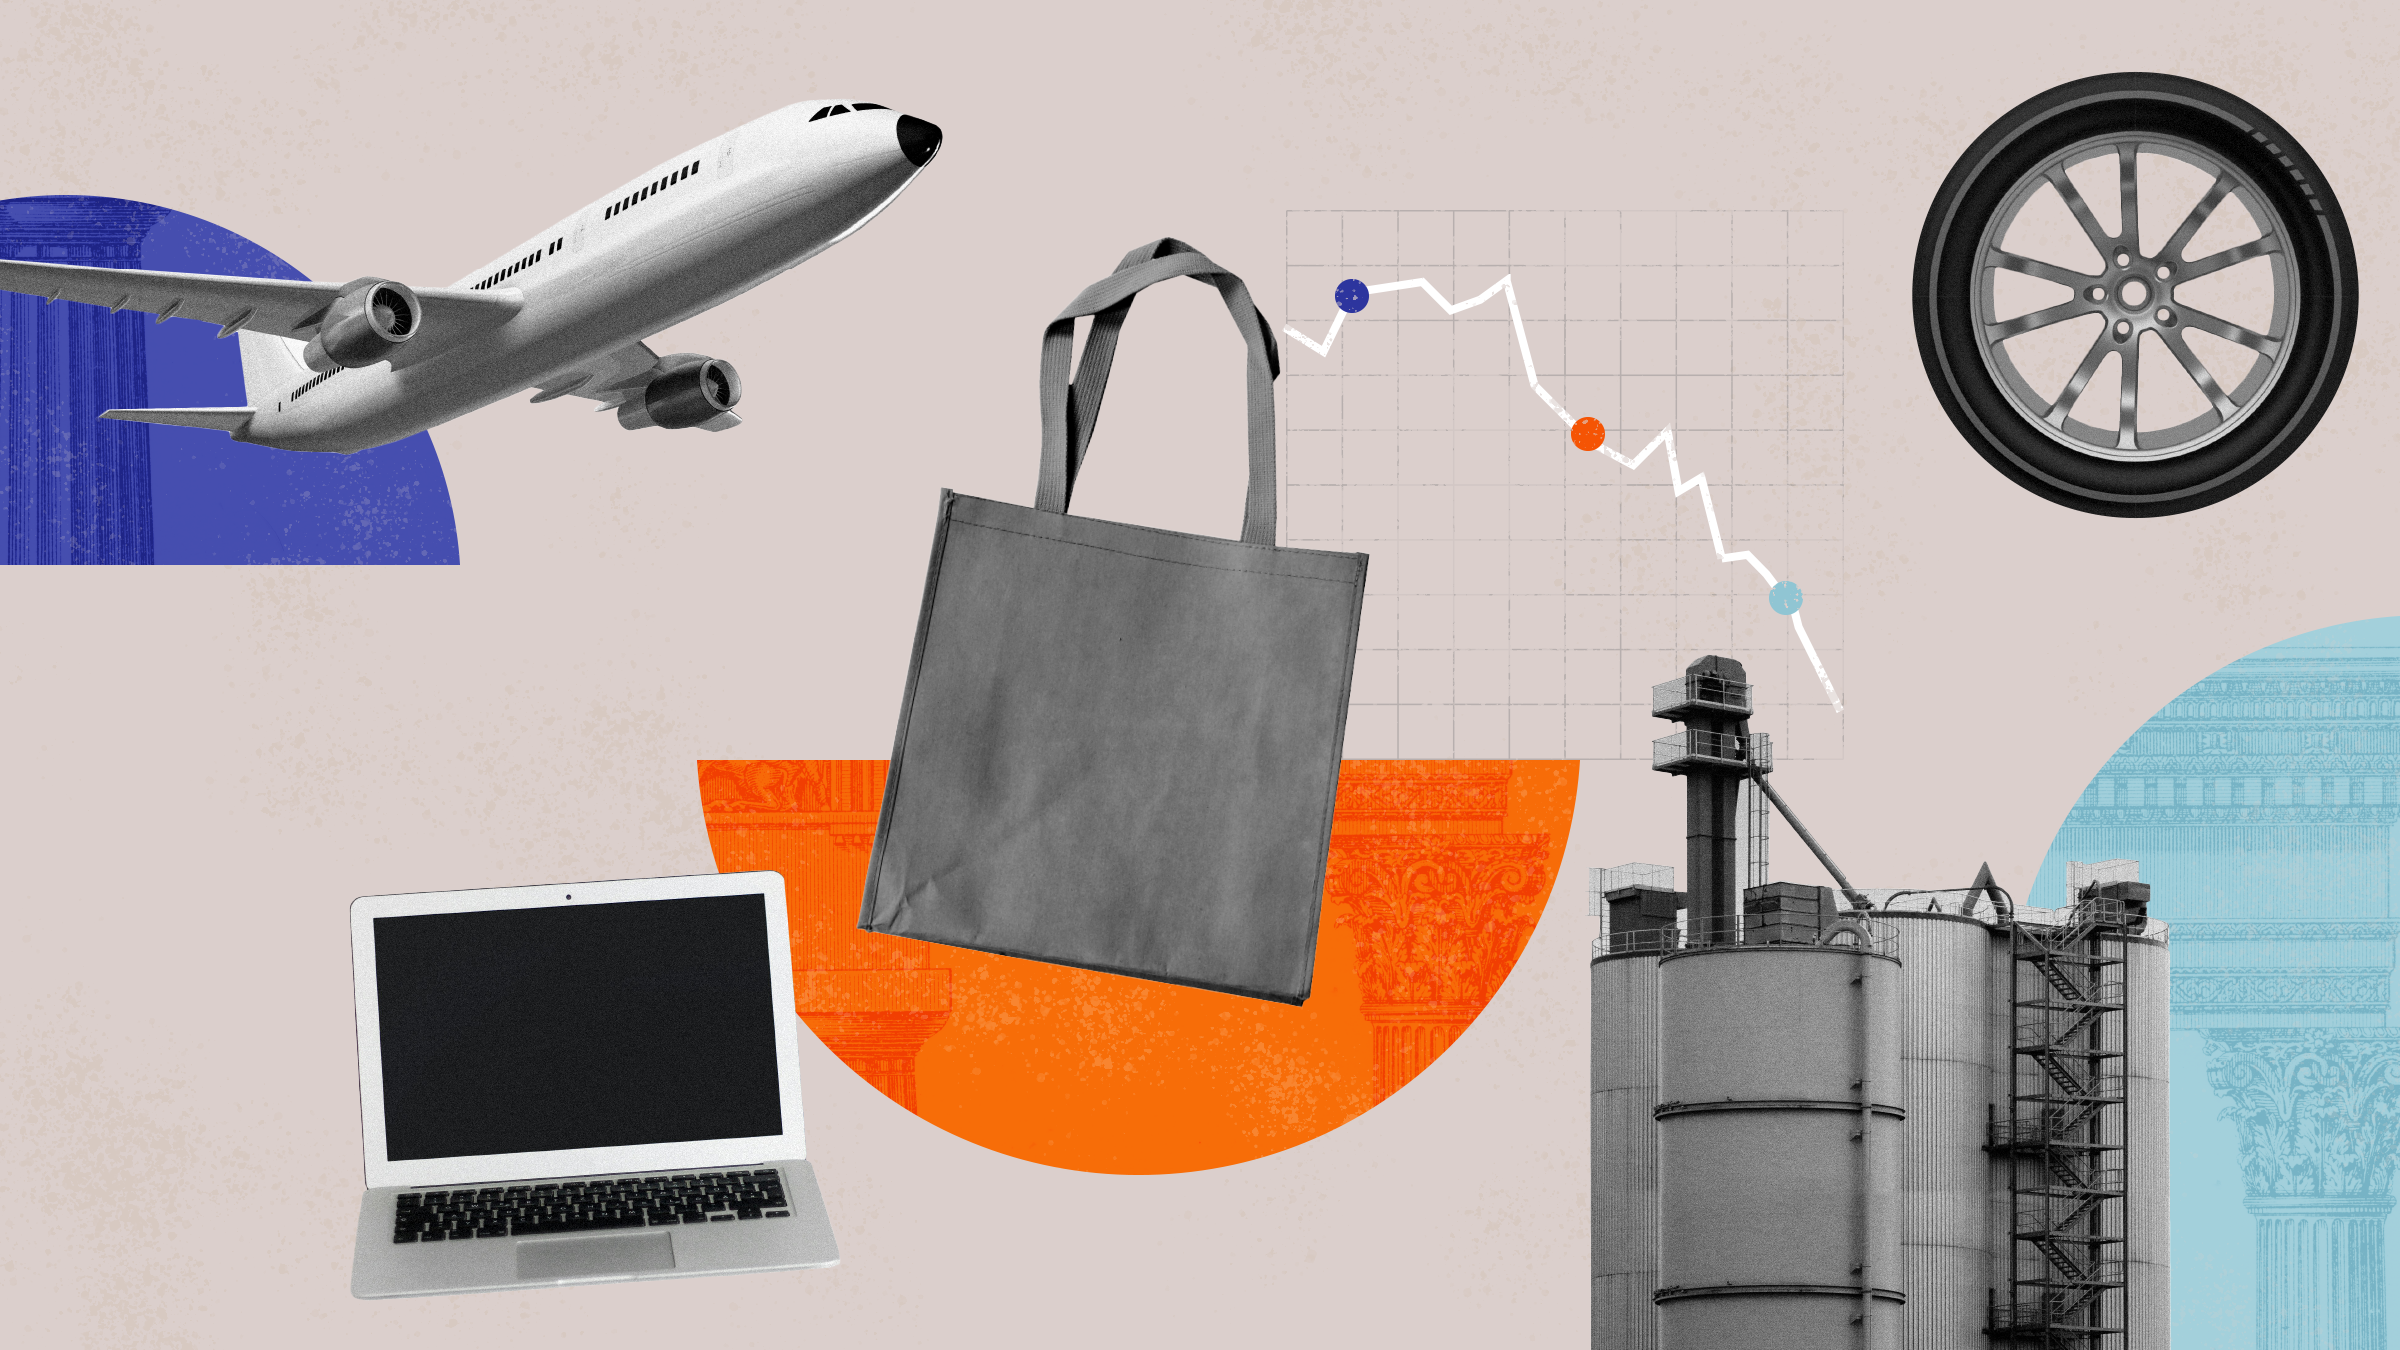 Collage with factory, plane, computer, tire, and shopping bag to represent the state of economy.